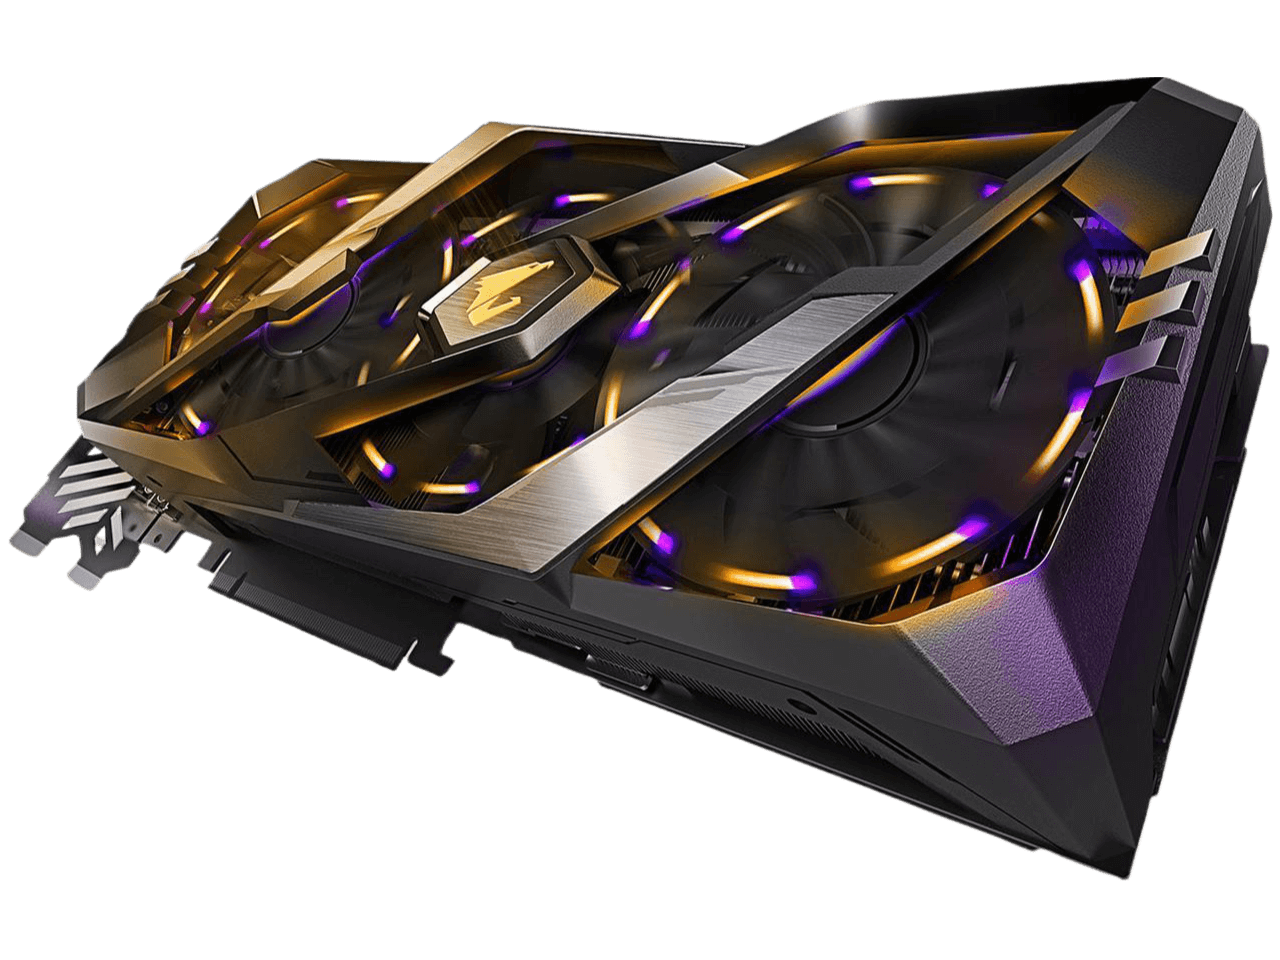 GIGABYTE GeForce RTX 2080 AORUS XTREME 8G 256-Bit GDDR6 with 3xStacked WINDFORCE Fans Video Card GV-N2080AORUS X-8GC